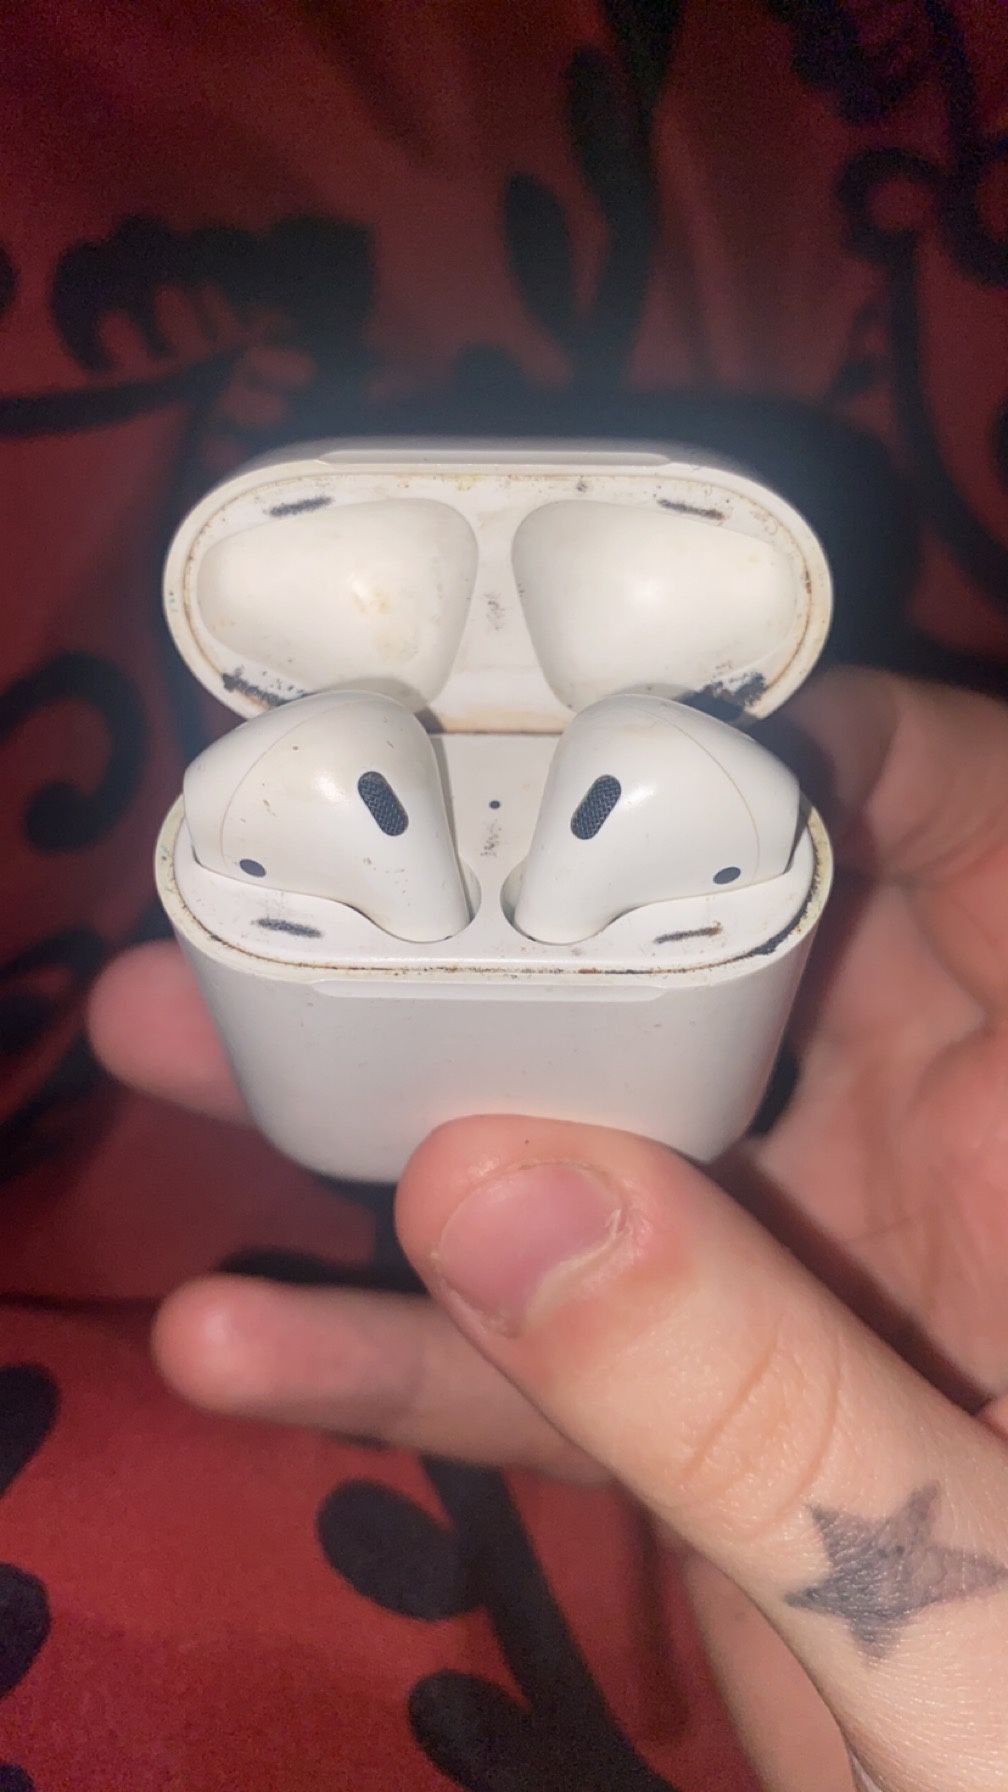 2nd Generation AirPods 